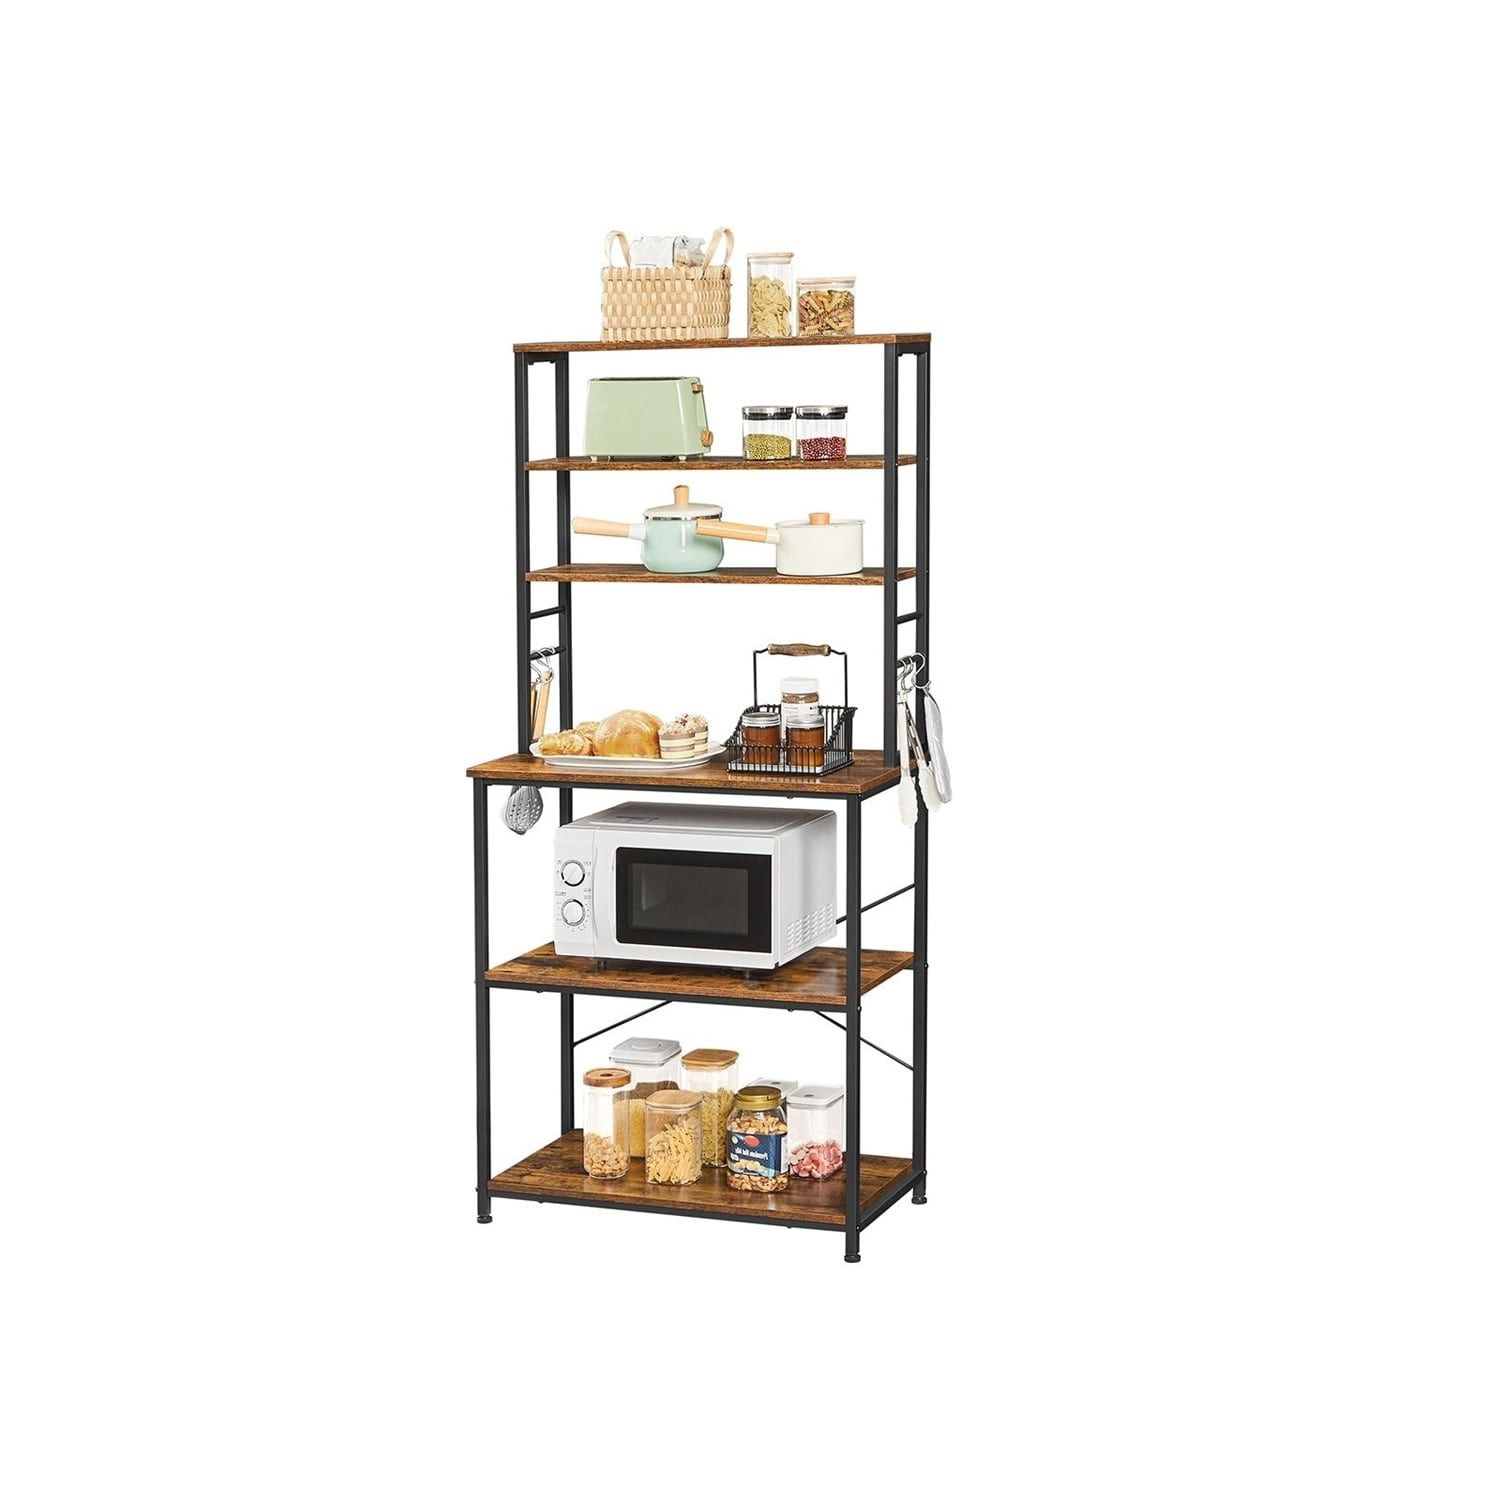 https://ak1.ostkcdn.com/images/products/is/images/direct/b82347f72a1234af79e7a5fc7e744a70fe4adc00/Farmhouse-6-Tier-Industrial-Utility-Kitchen-Bakers-Rack-Microwave-Stand.jpg